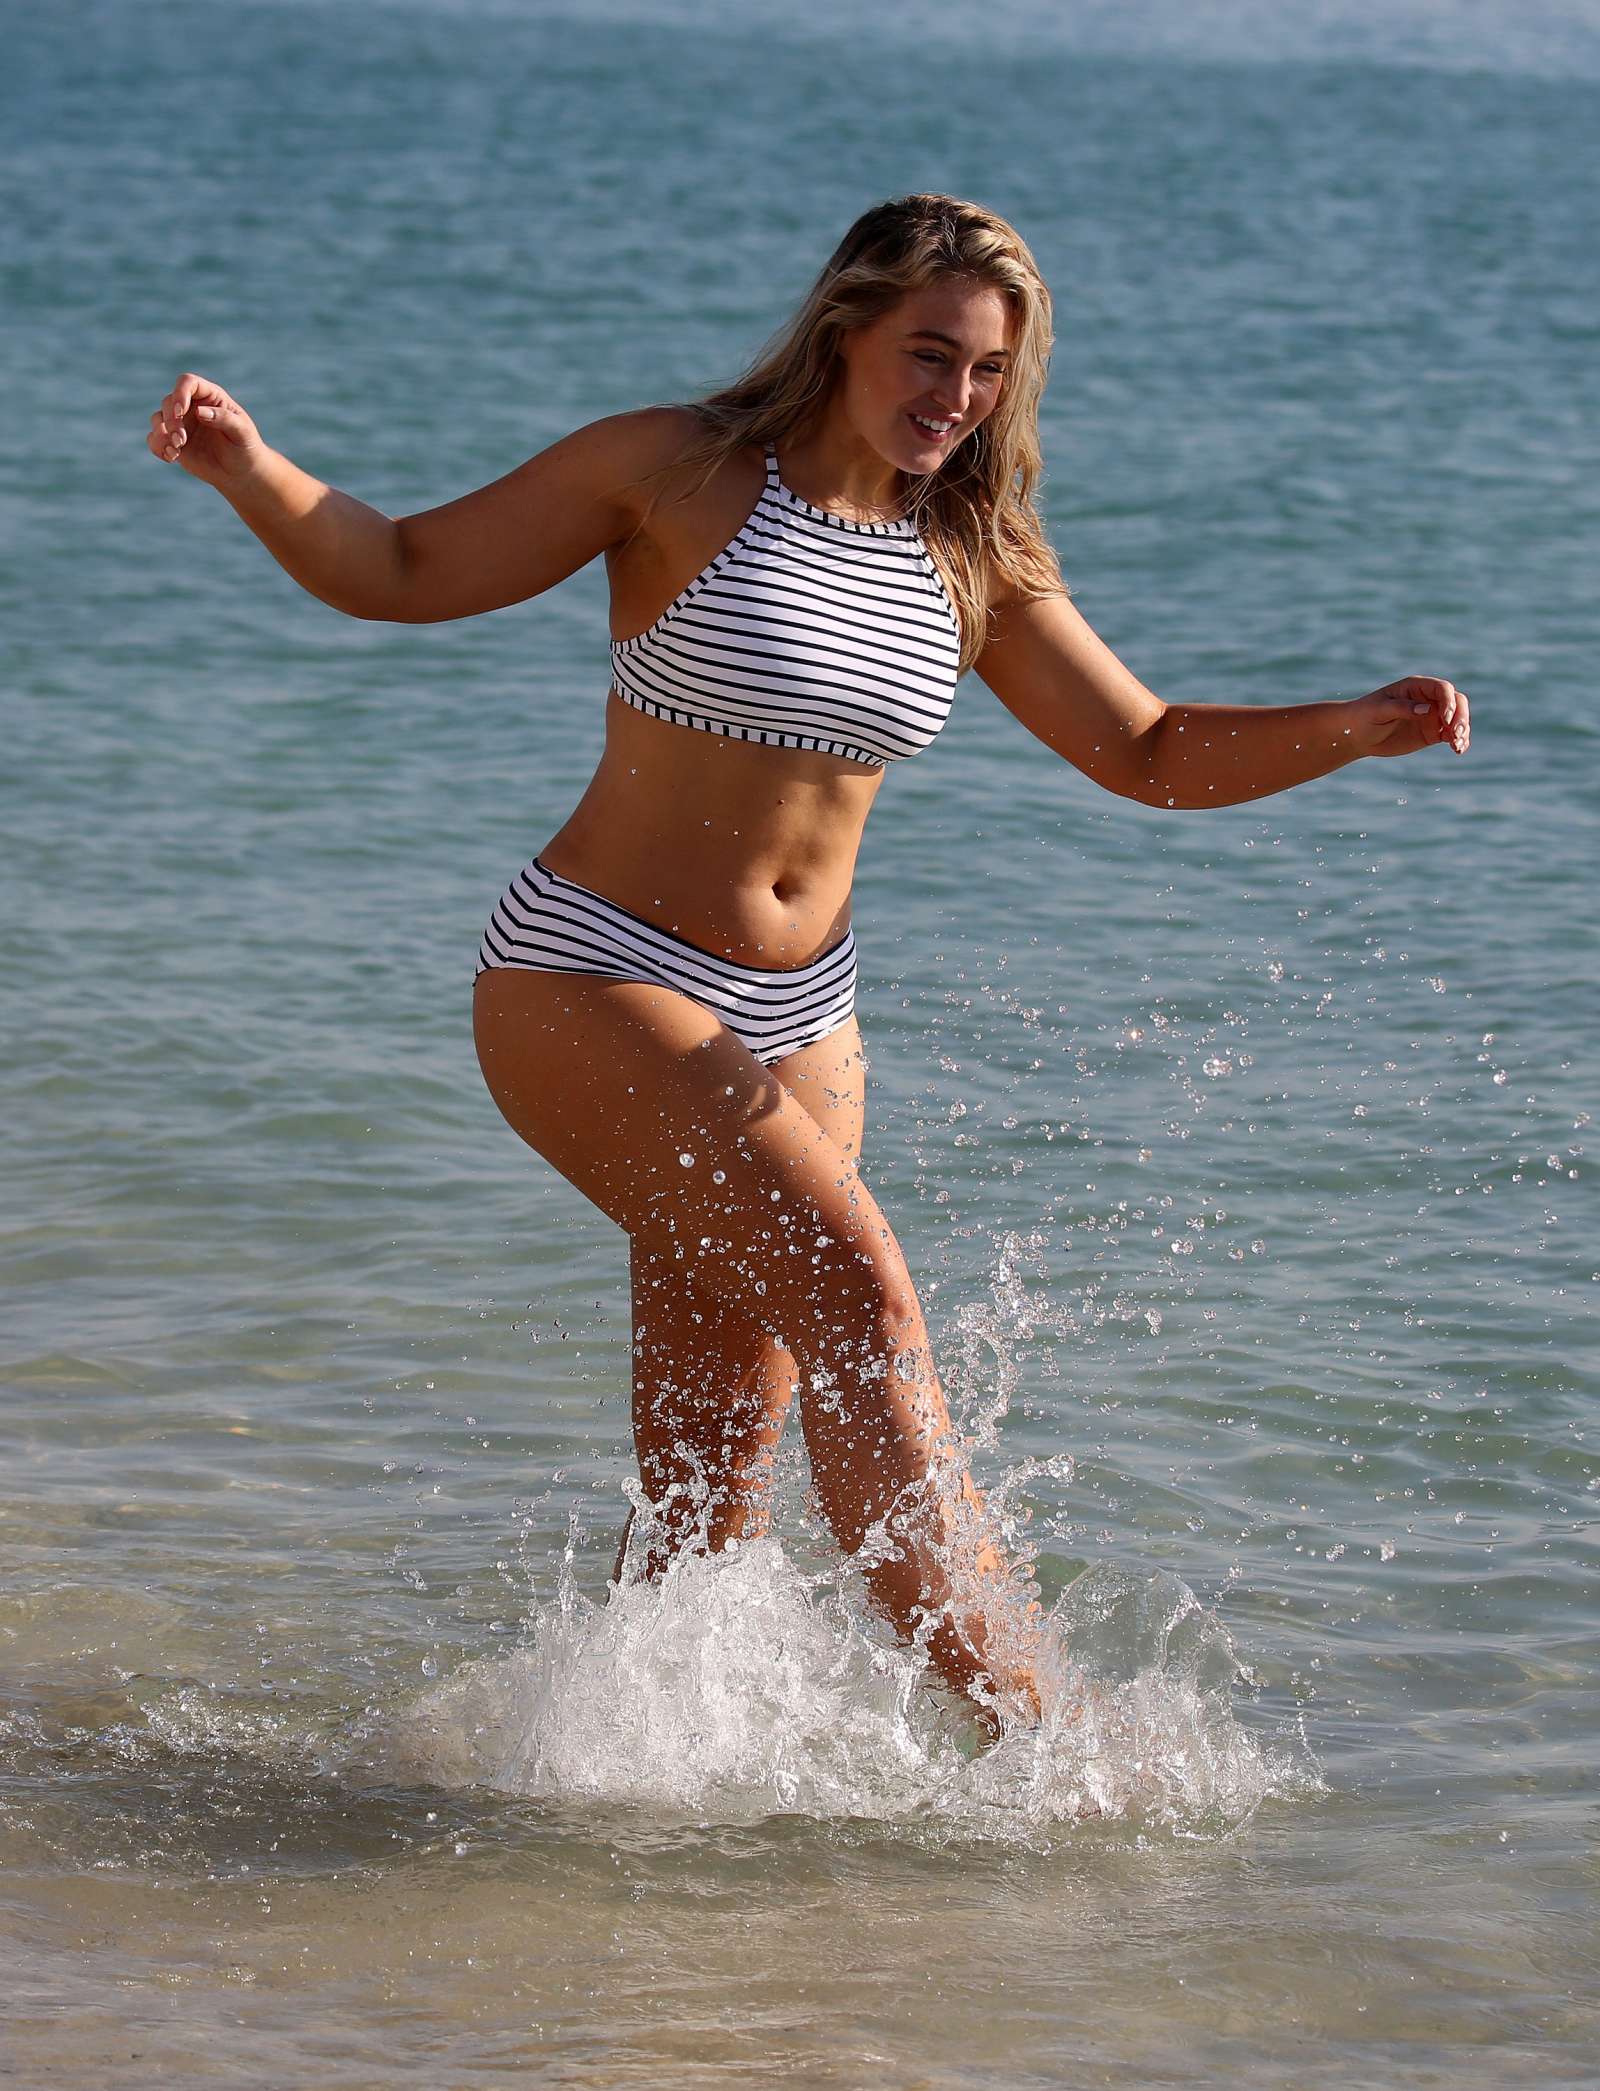 Iskra Lawrence in Bikinis and Swimsuits â€“ Photoshoot for Aerie on Miami Beach